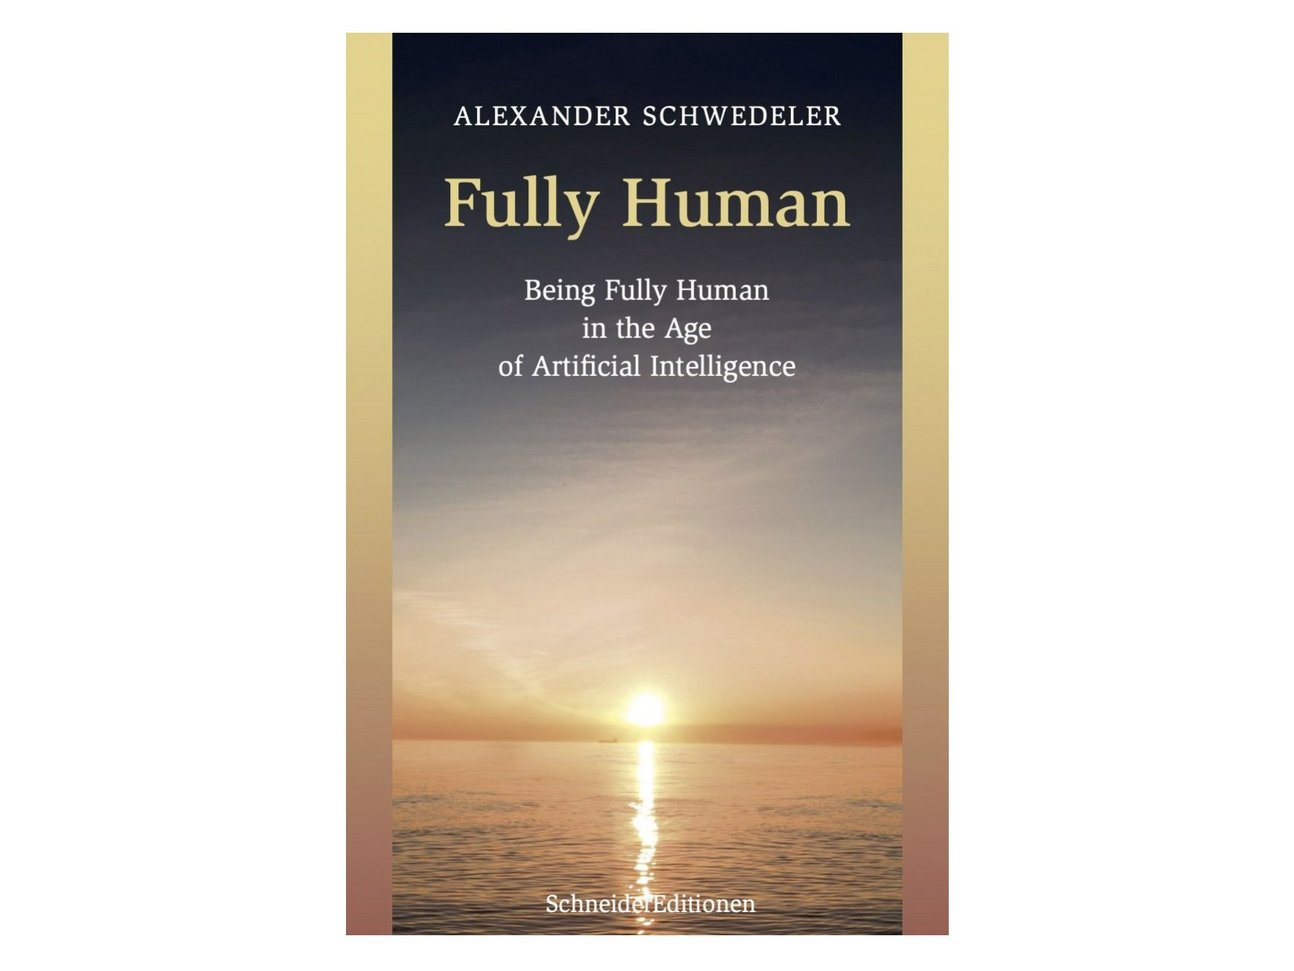 Fully Human: Being Fully Human in the Age of Artificial Intelligence